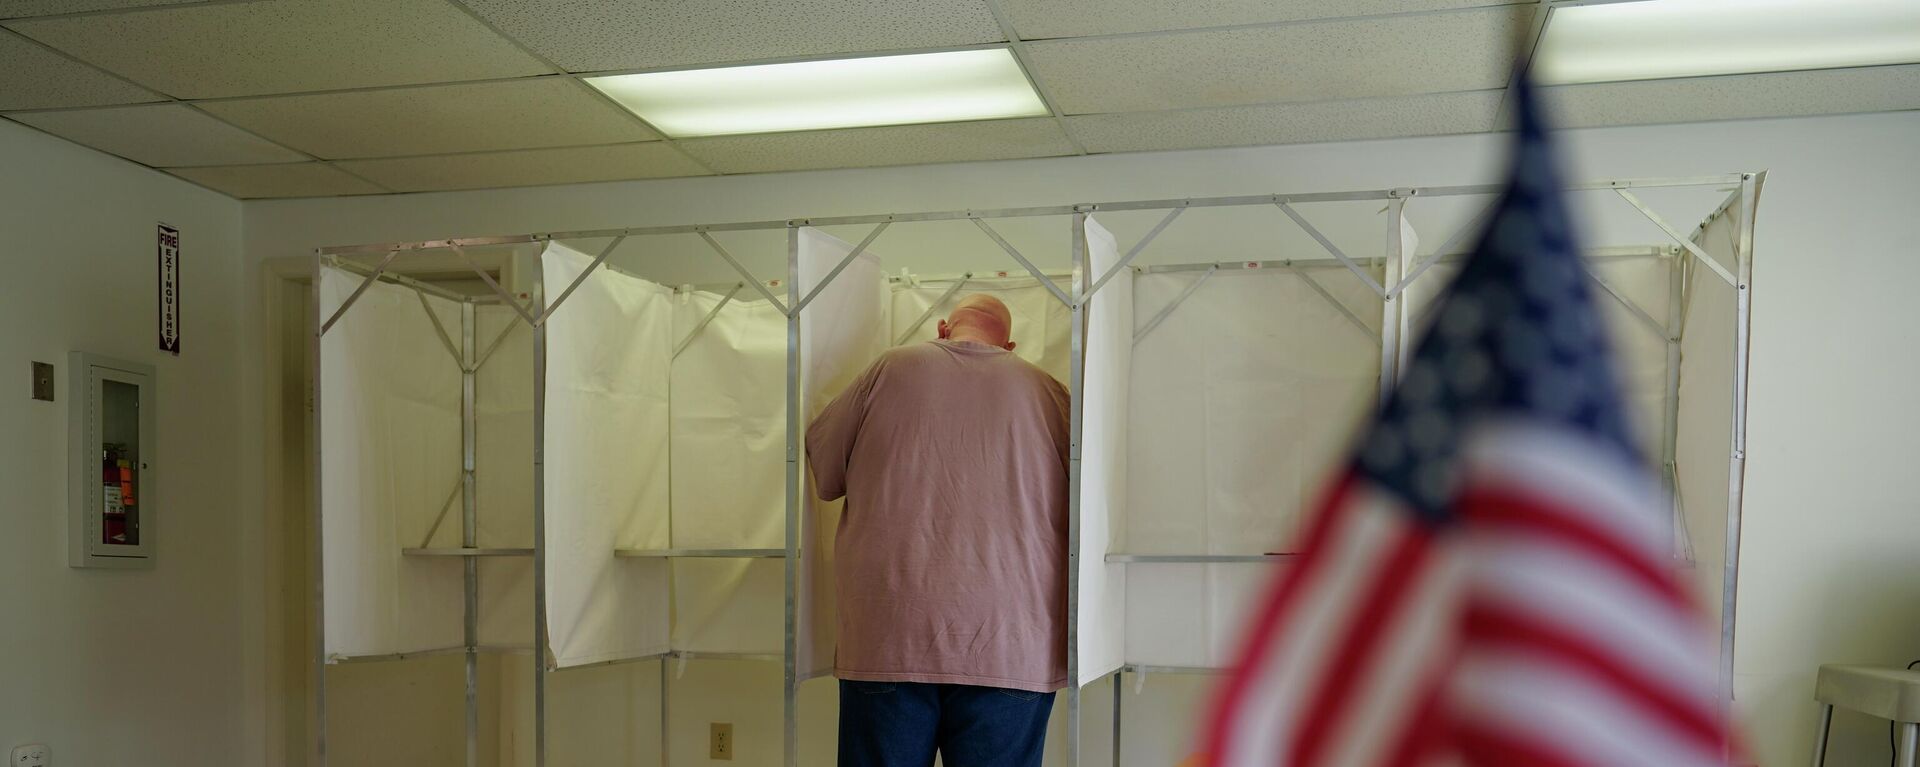 FILE - A voter fills out a ballot during the Pennsylvania primary election at the Michaux Manor Living Center in Fayetteville, Pa., May 17, 2022. As the 2022 midterm elections enter their final two-month sprint, leading Republicans concede that their party's advantage may be slipping even as Democrats confront their president's weak standing, deep voter pessimism and the weight of history this fall. - Sputnik International, 1920, 25.10.2022